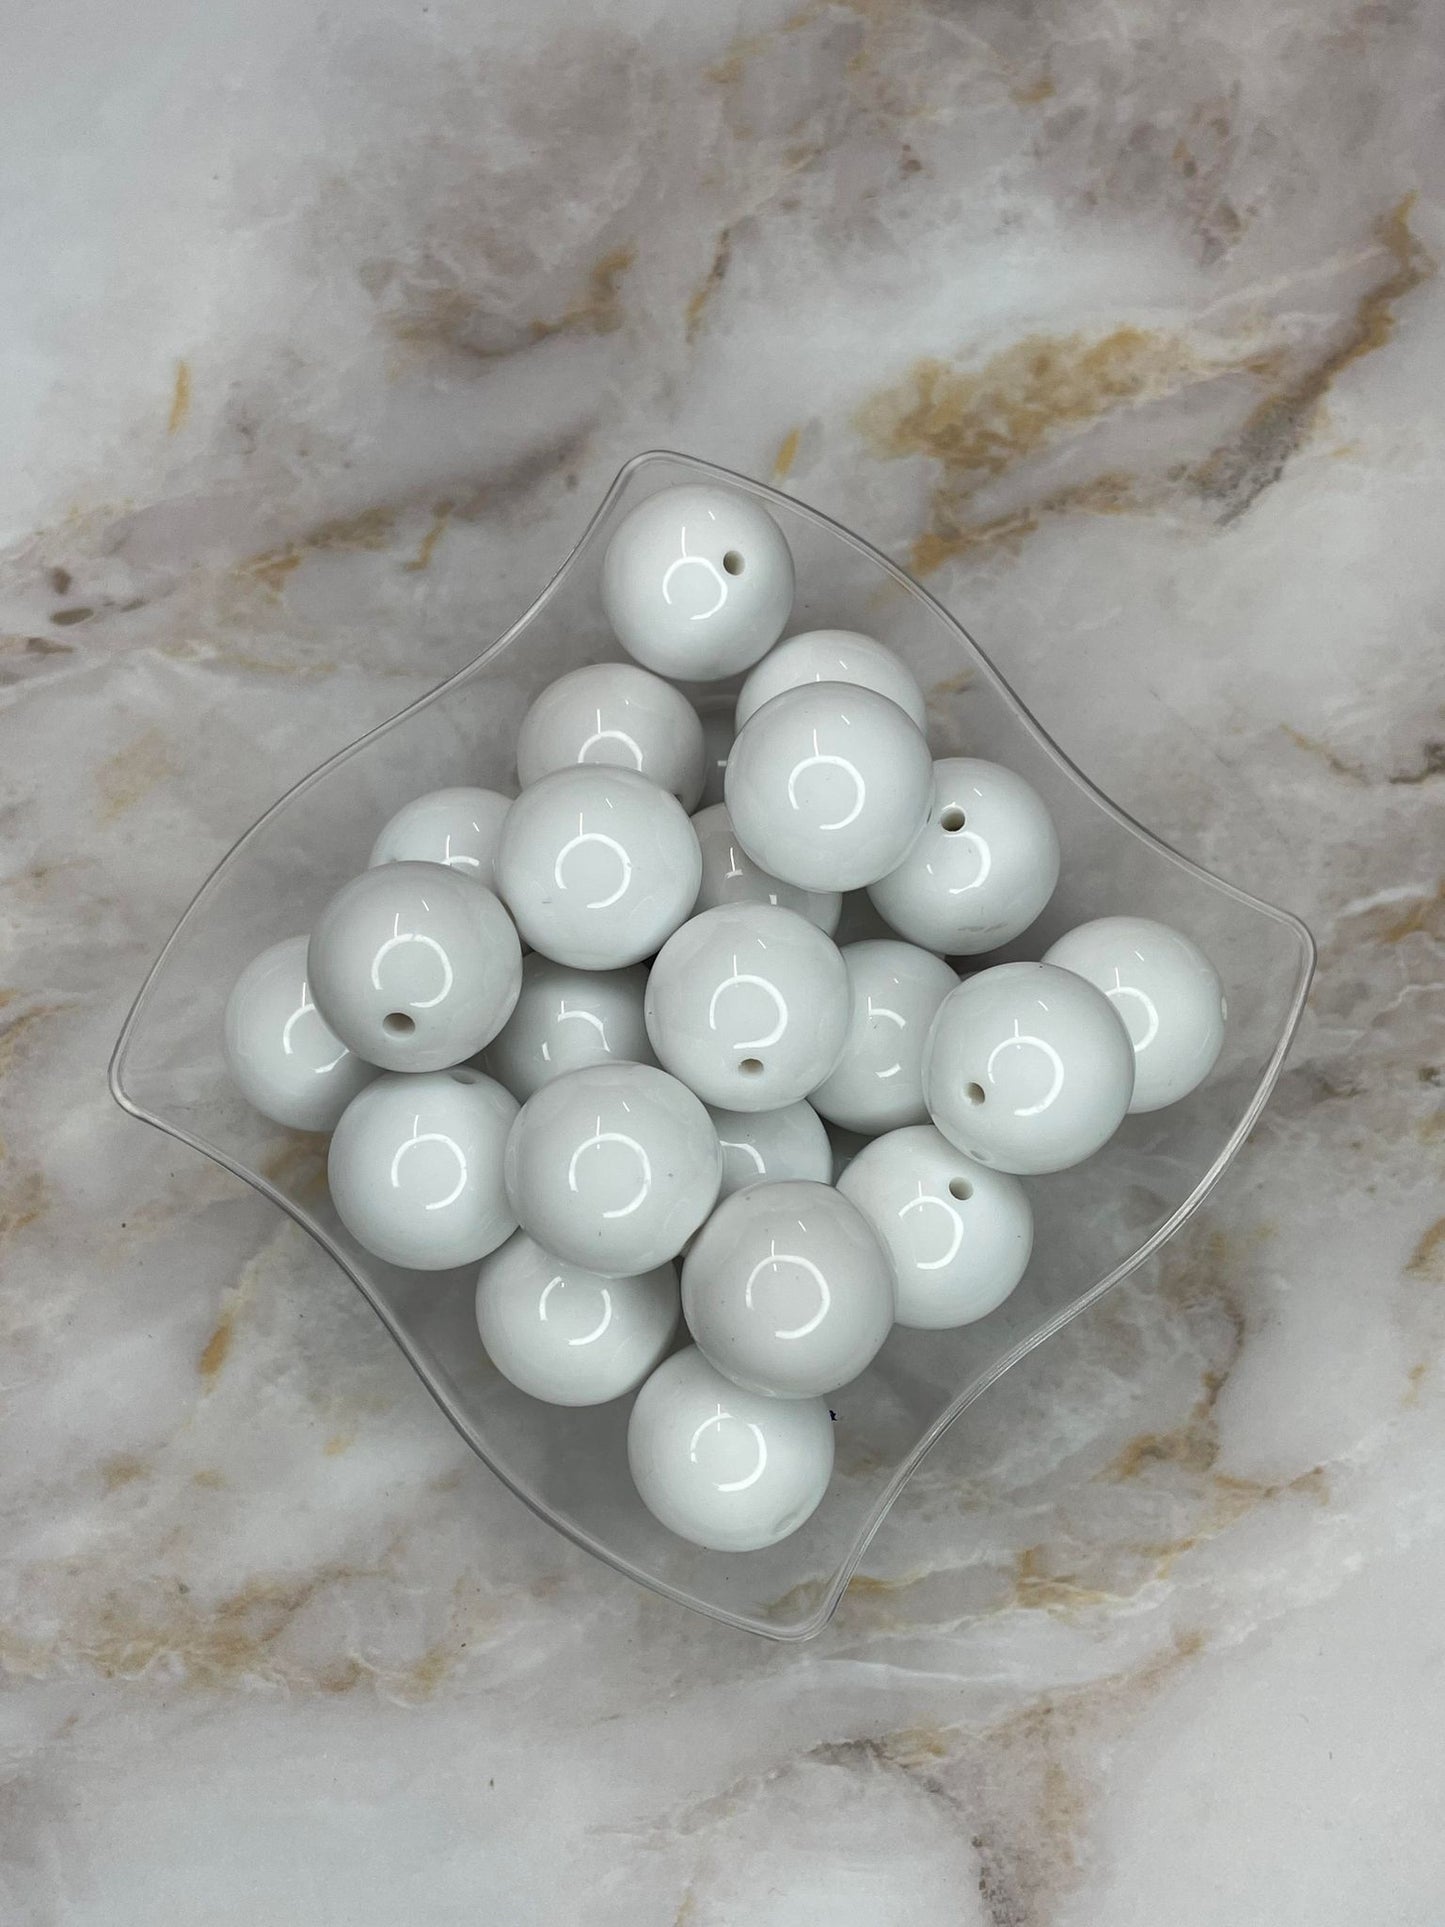 **DISCONTINUED** 20MM SOLID ACRYLIC WHITE